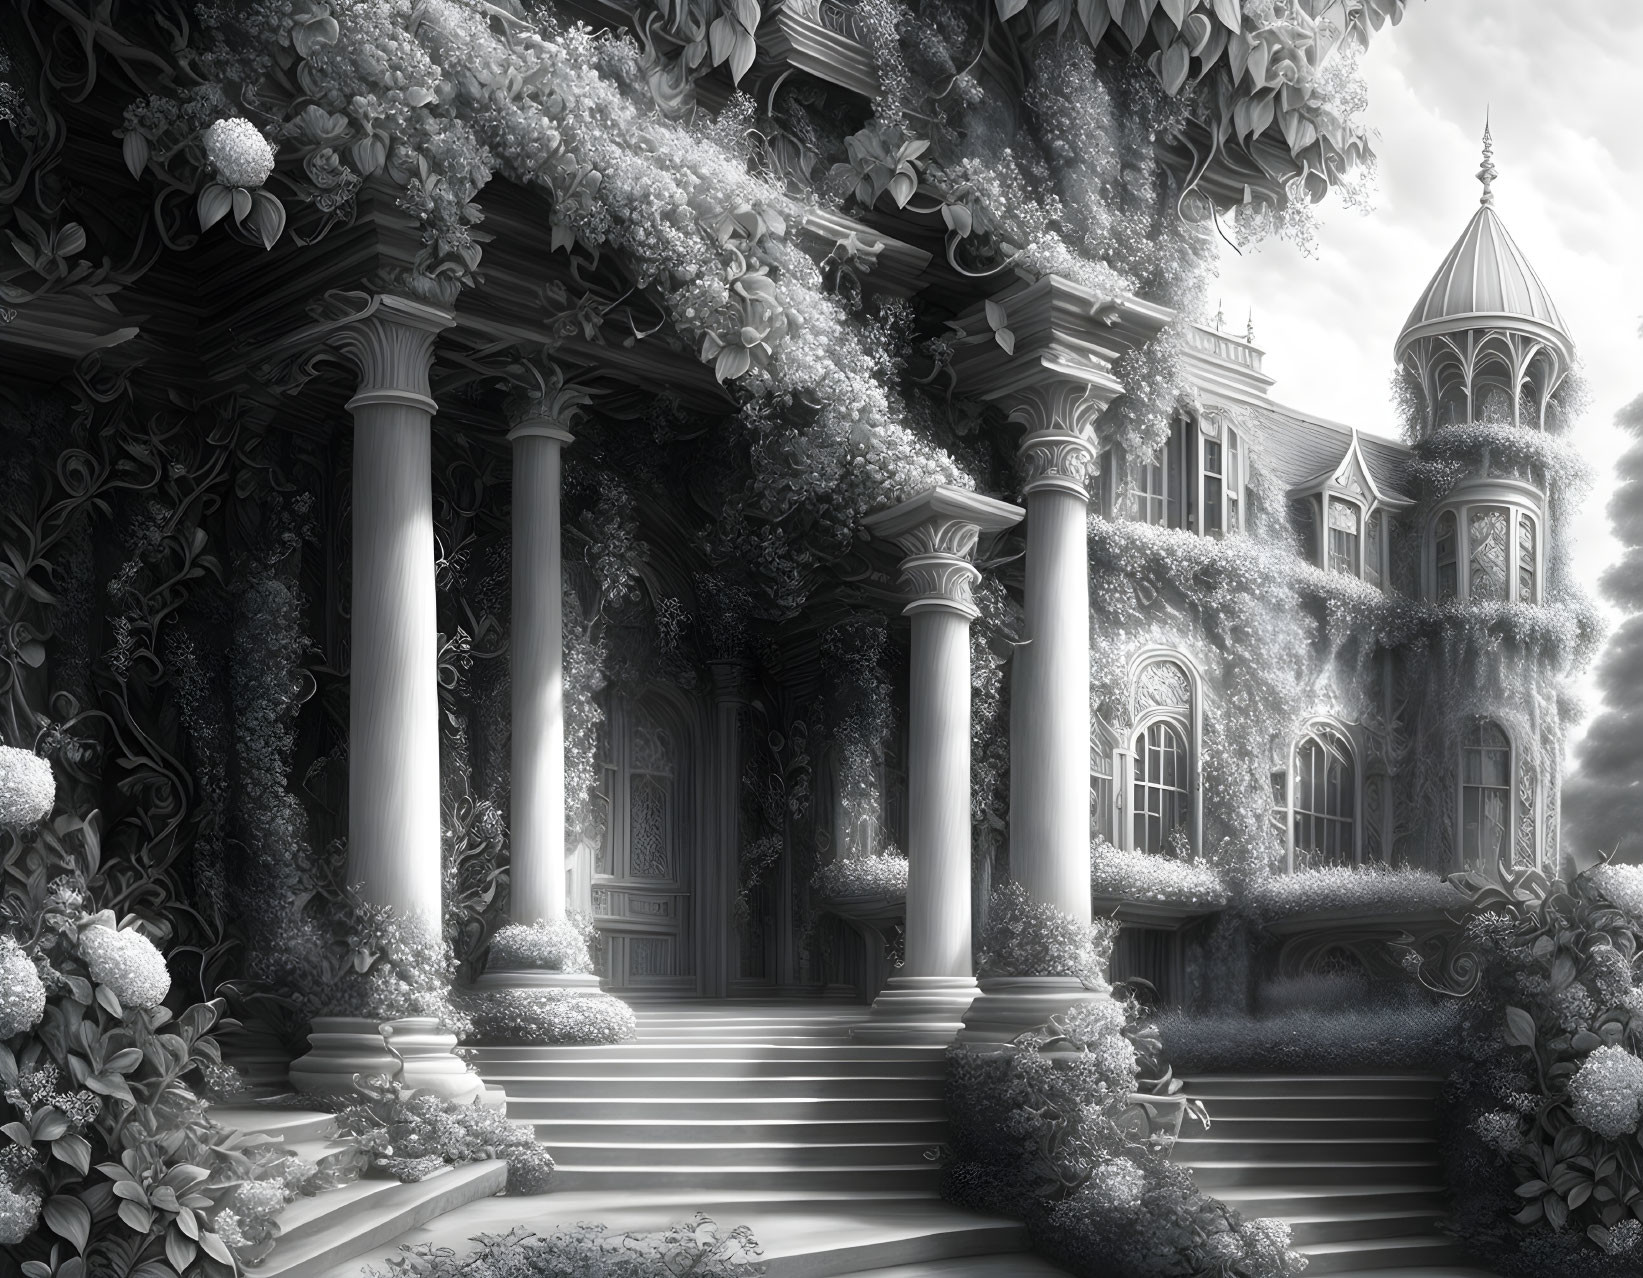 Monochrome Victorian-style house illustration with ivy and classical columns